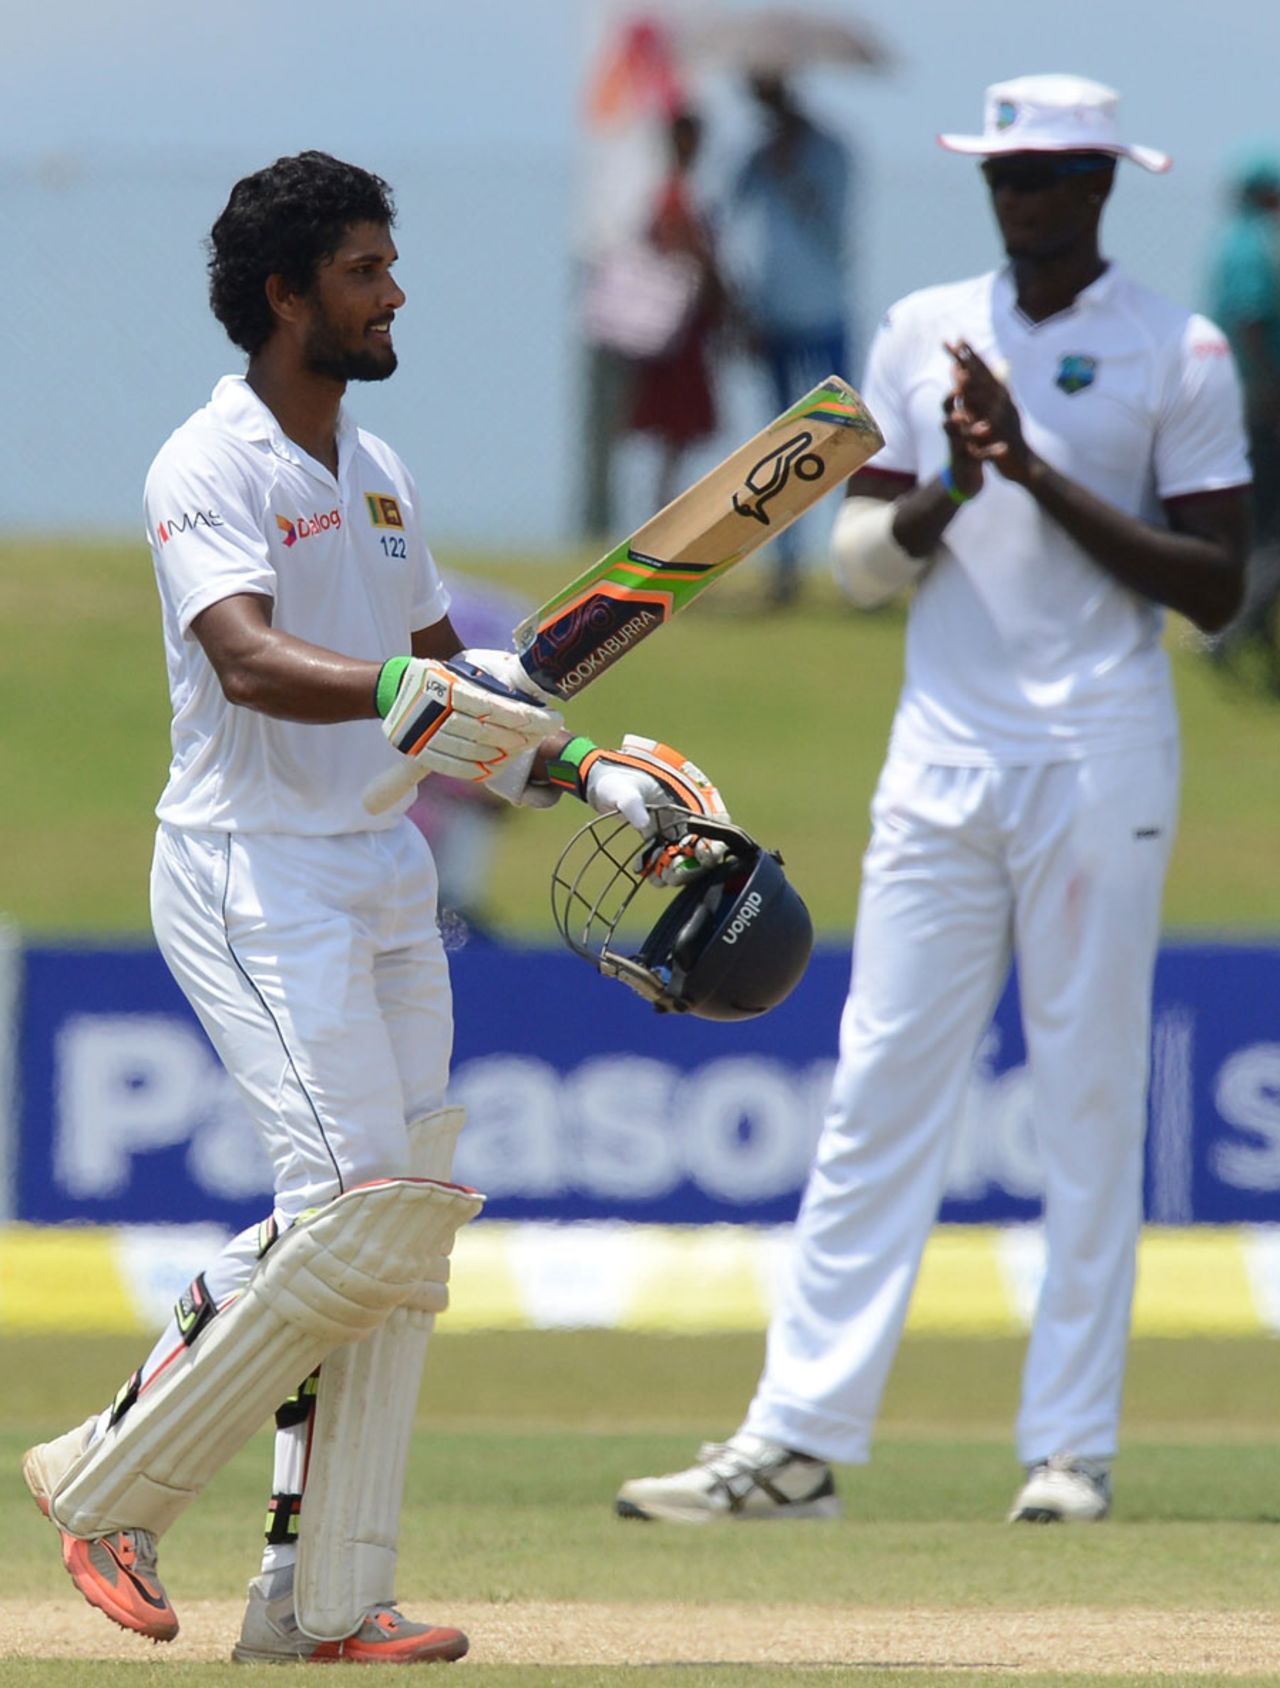 Dinesh Chandimal struck his second consecutive hundred in Galle, Sri Lanka v West Indies, 1st Test, Galle, 2nd day, October 15, 2015